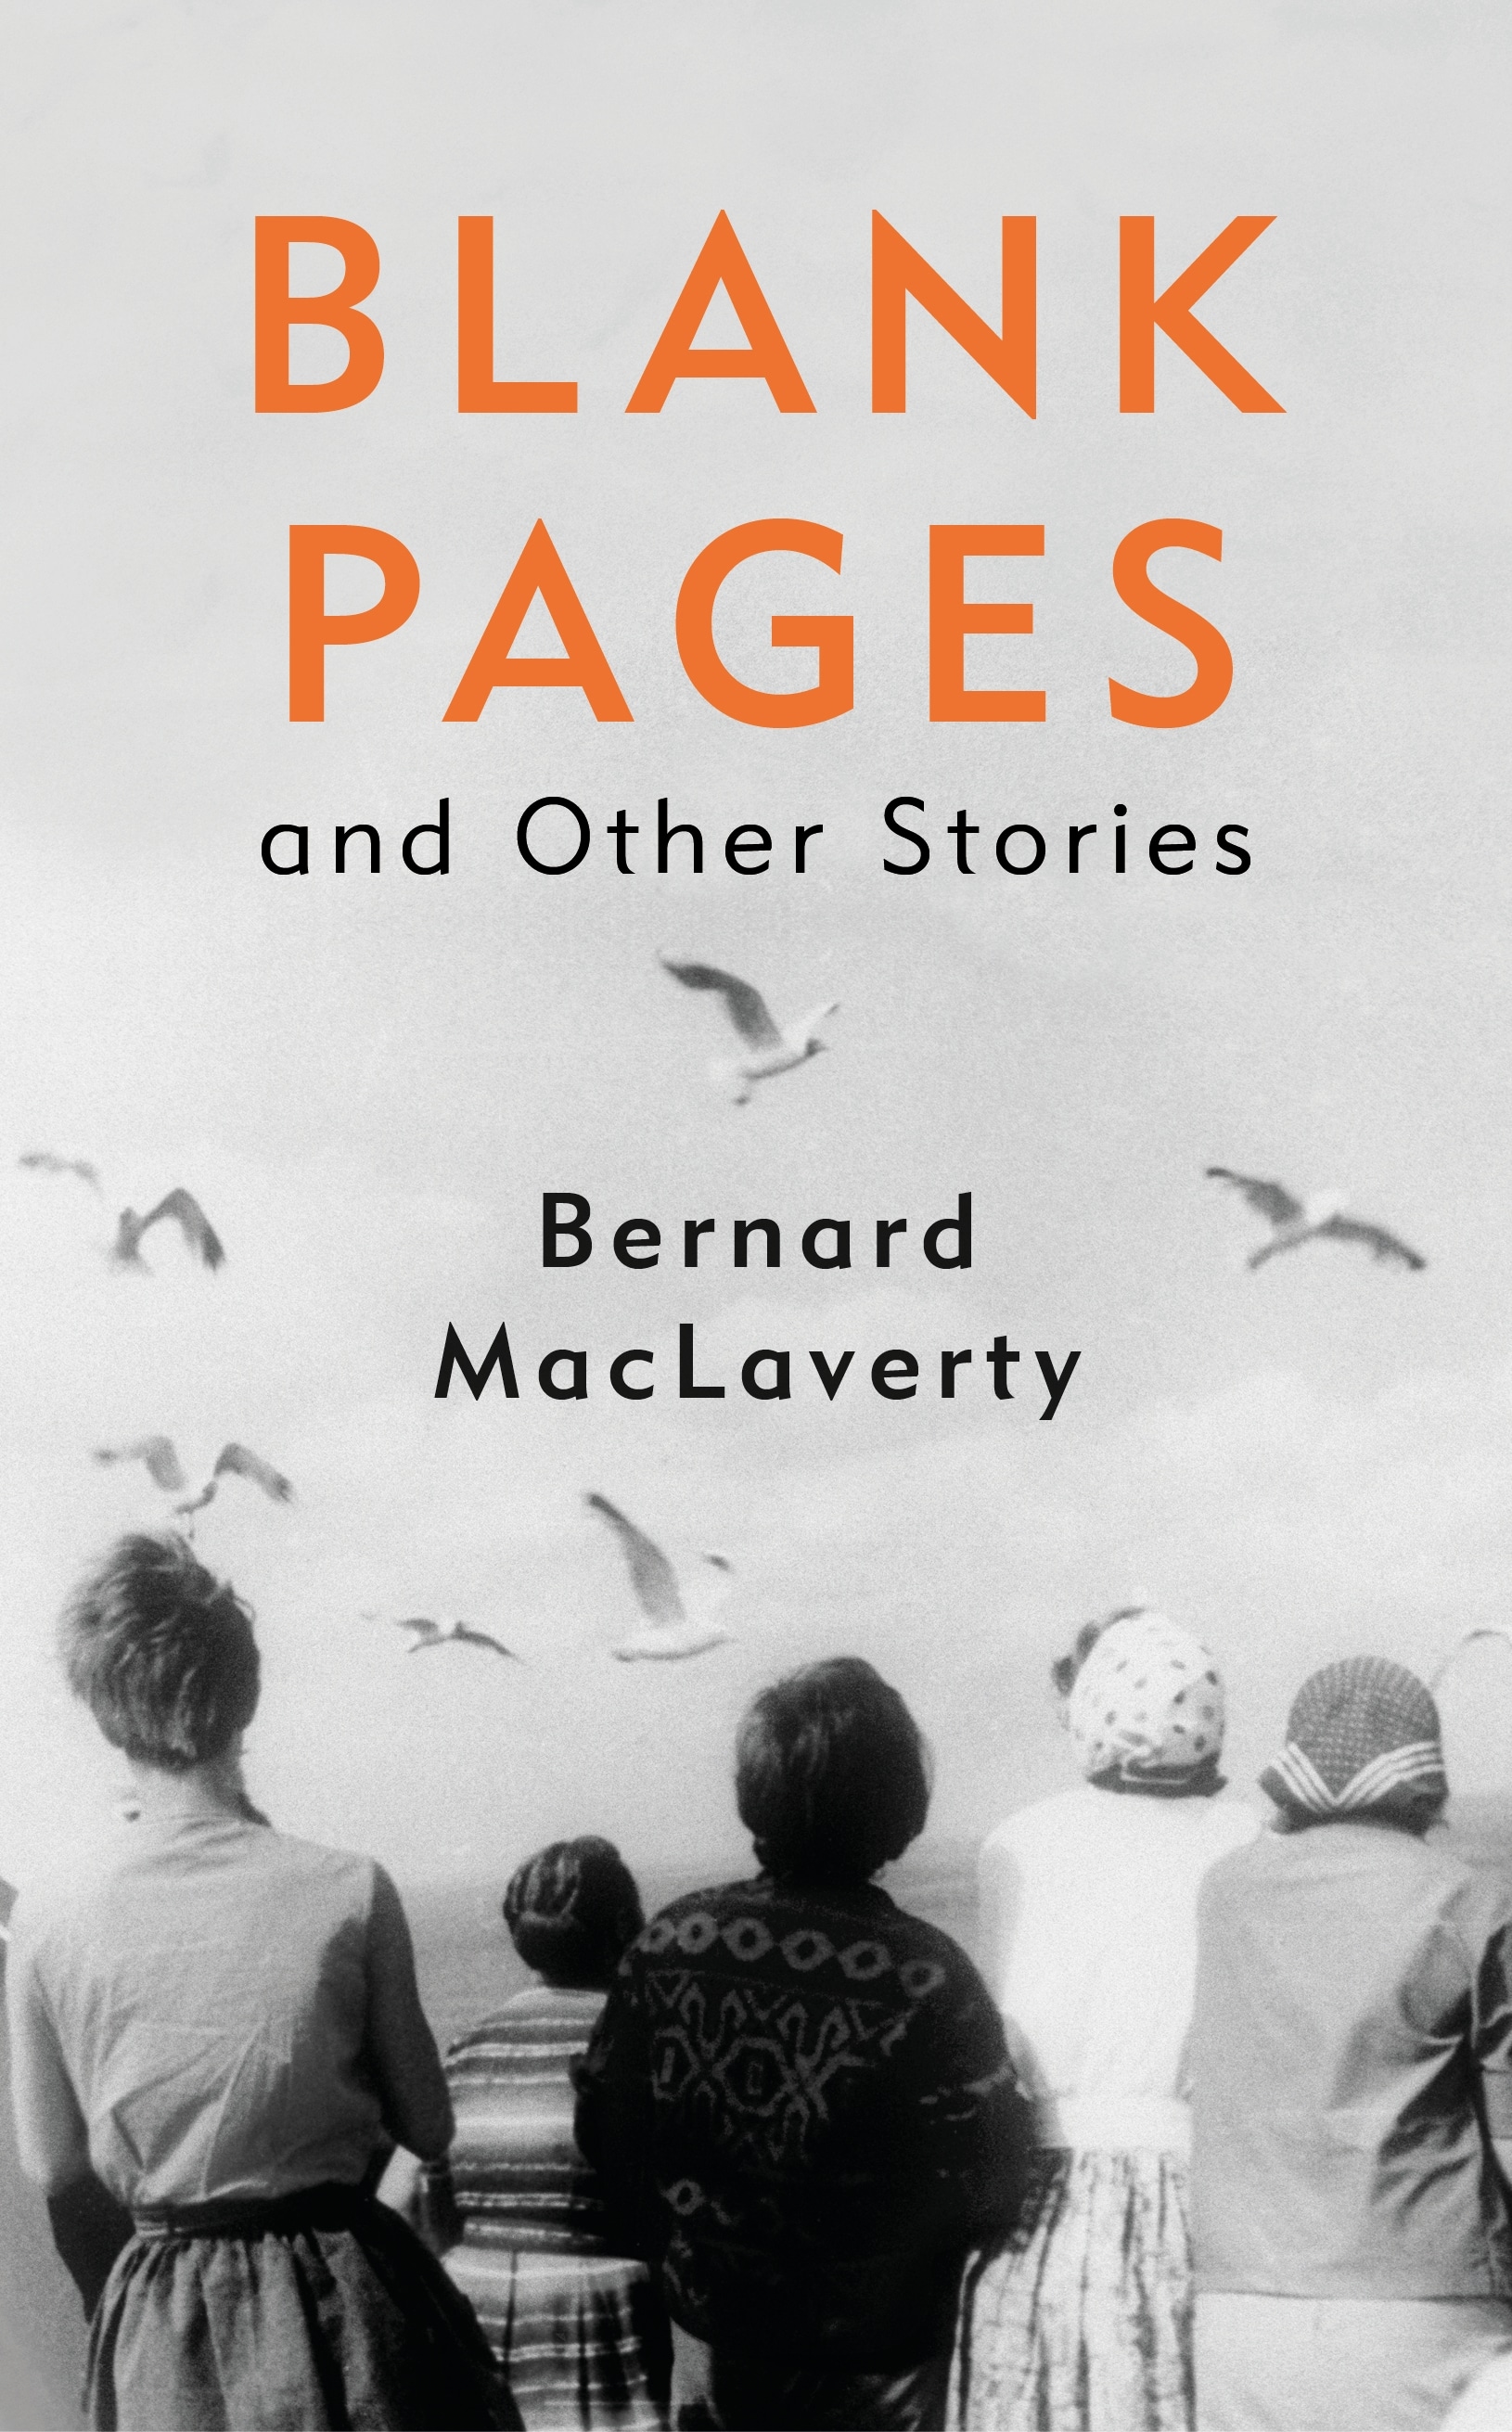 Book “Blank Pages and Other Stories” by Bernard MacLaverty — August 5, 2021